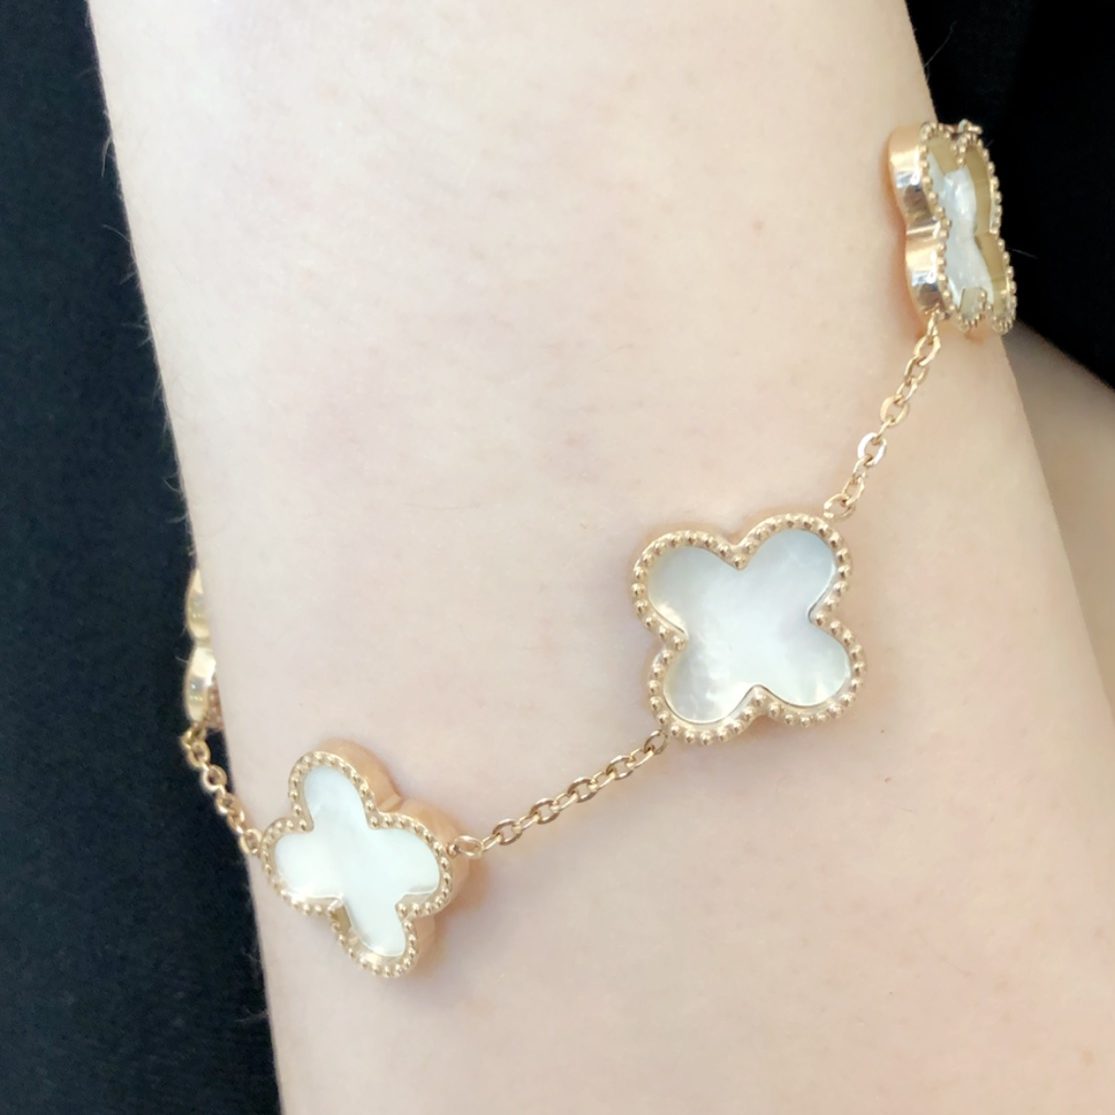 Trish - 18K Gold Plated Clover Bracelet With Mother of Pearl Detail